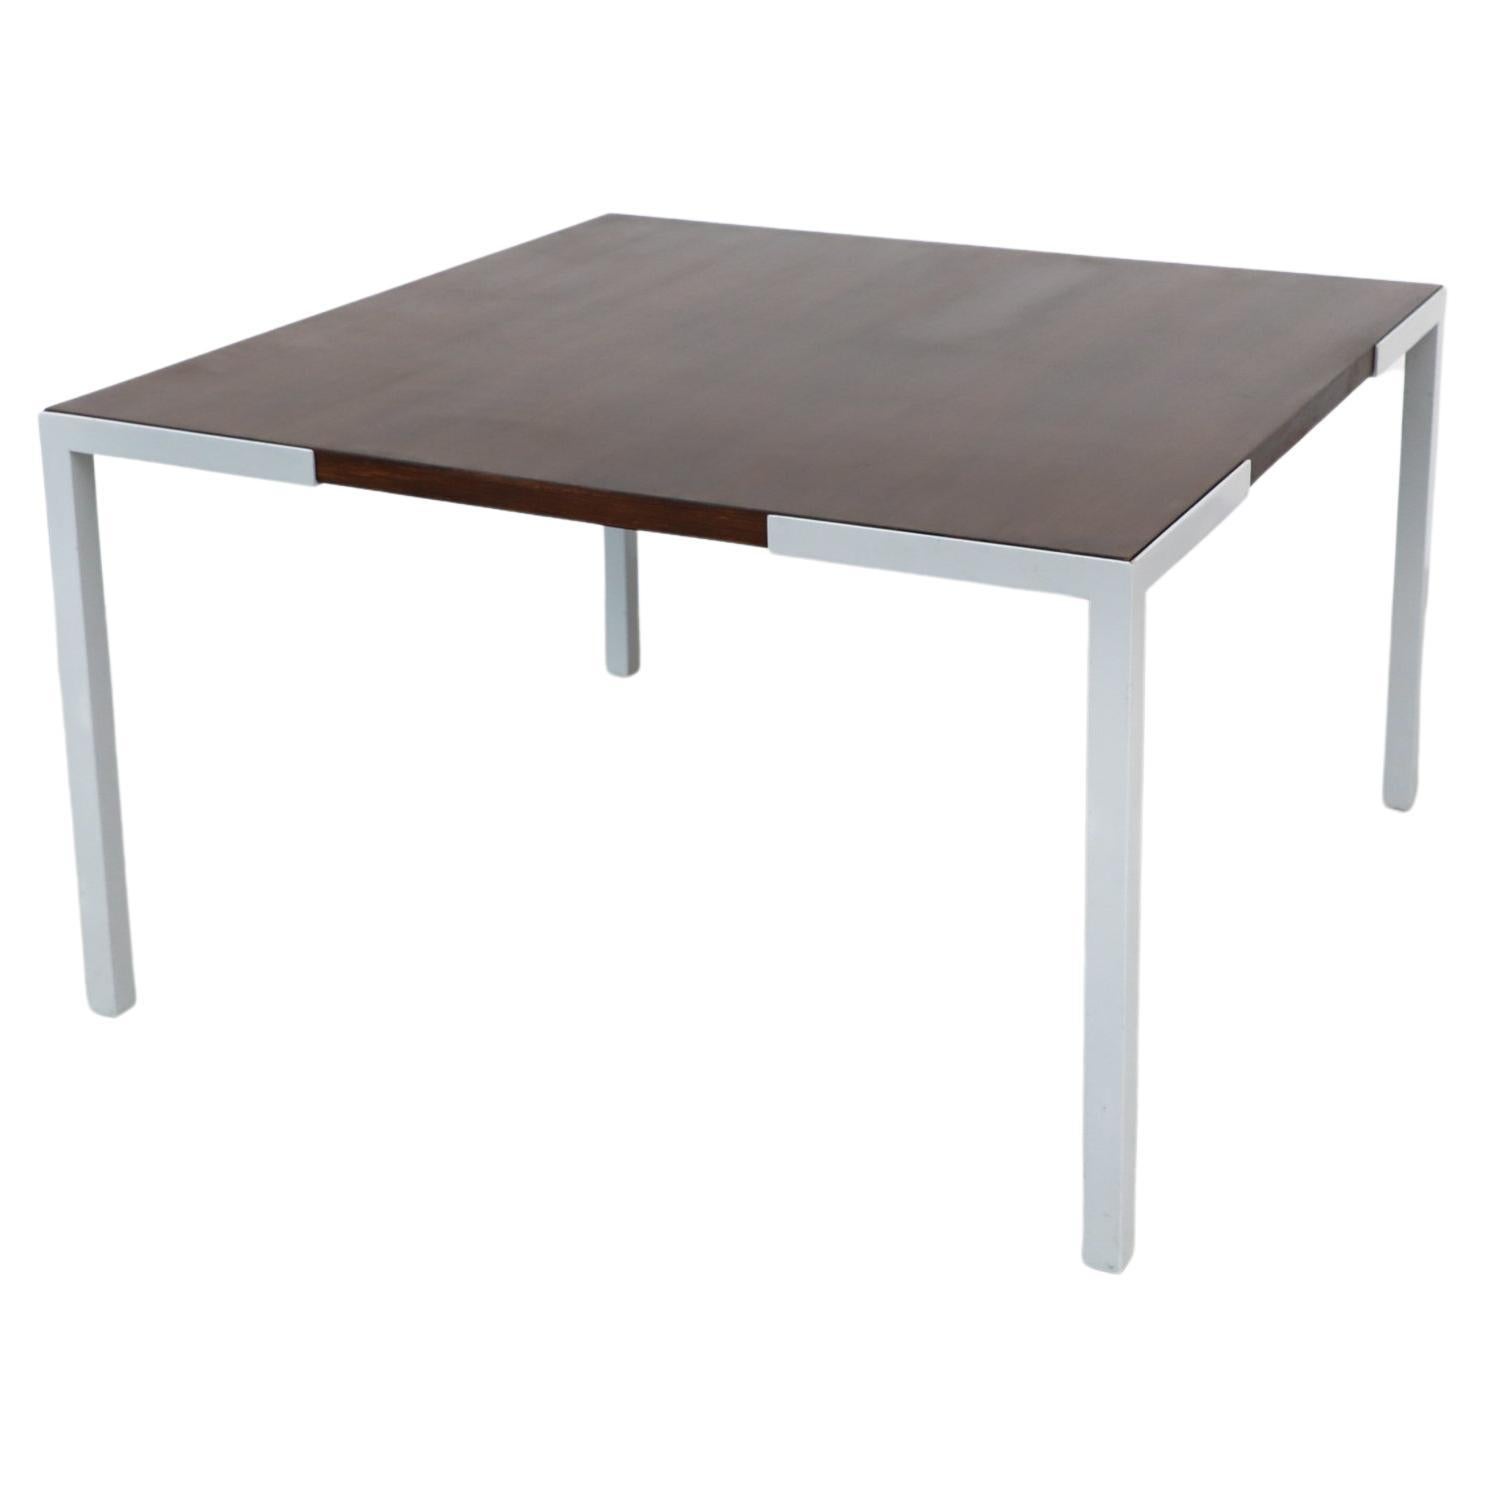 Wim den Boon Square Wenge and Light Gray Enameled Metal Dining Table For Sale